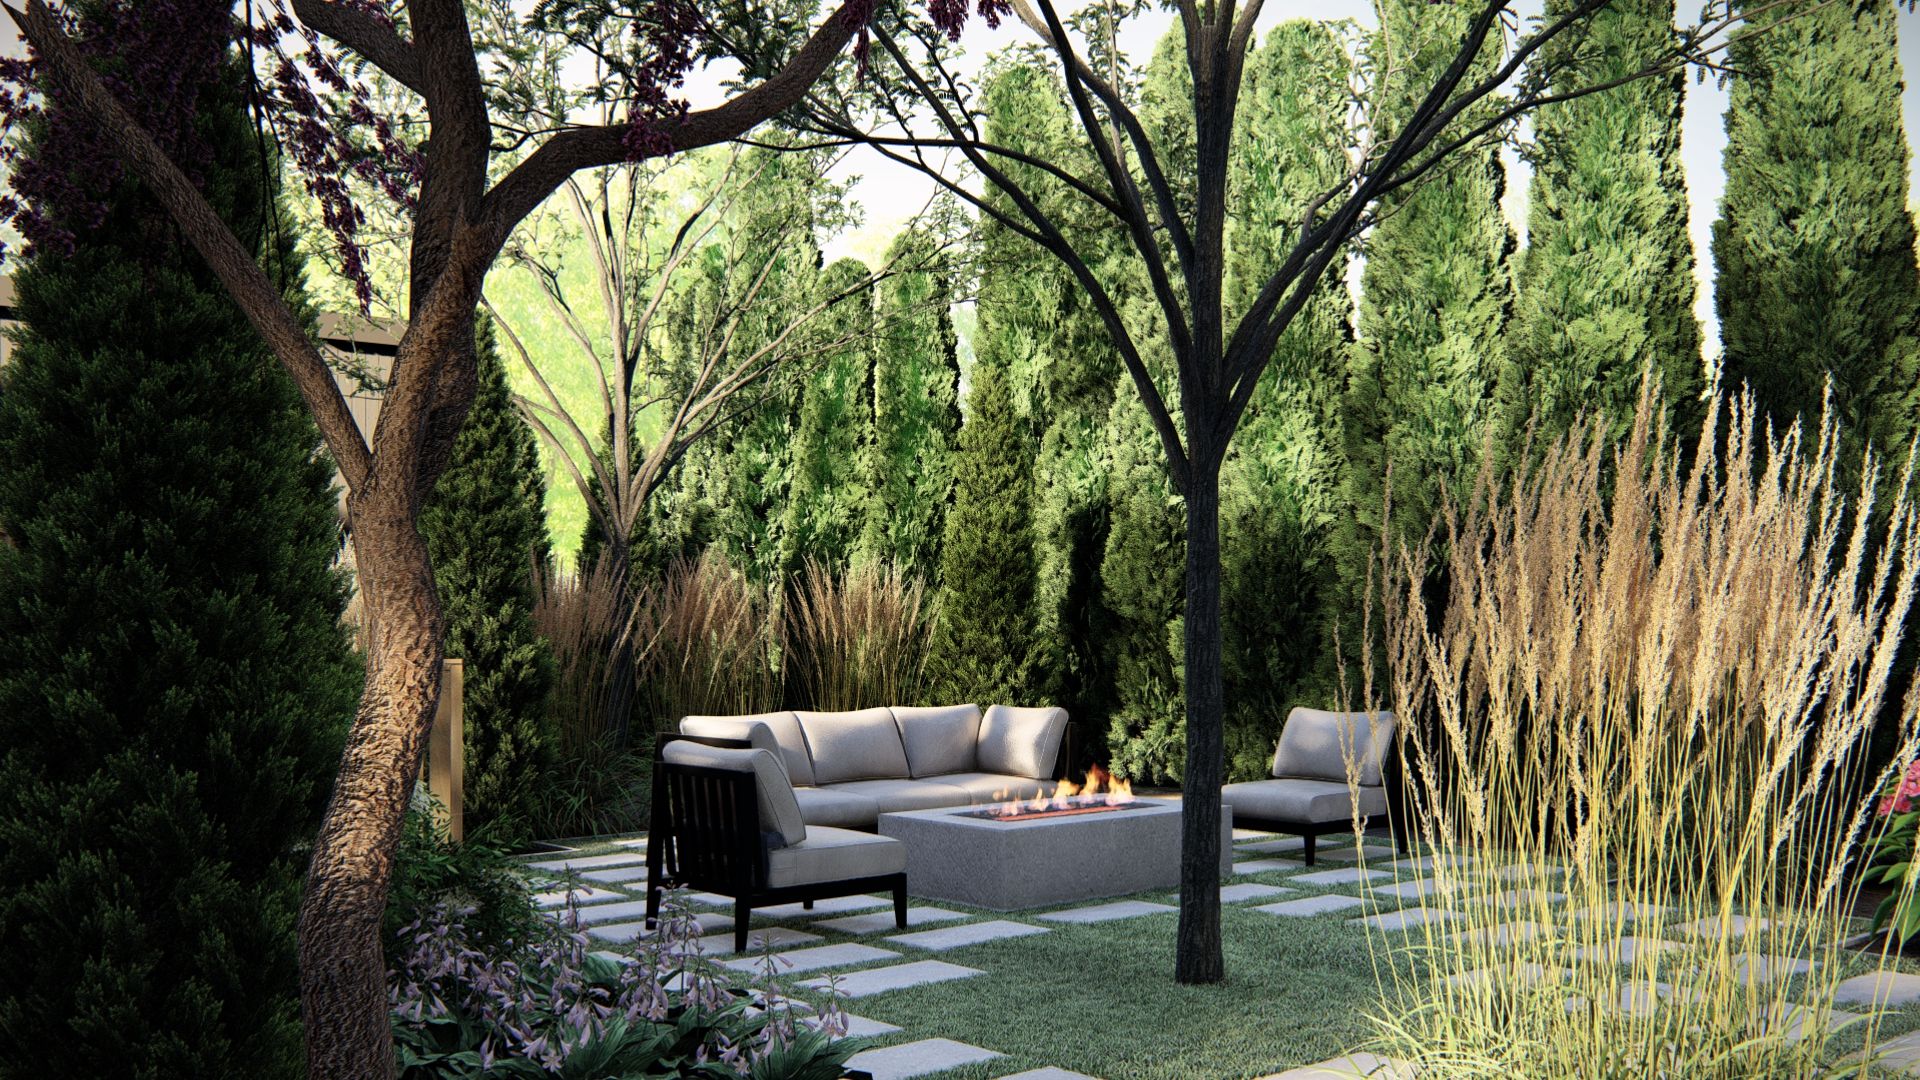 corner garden ideas, sectional sofa in a garden corner surrounded by grasses and other plants away from prying eyes 